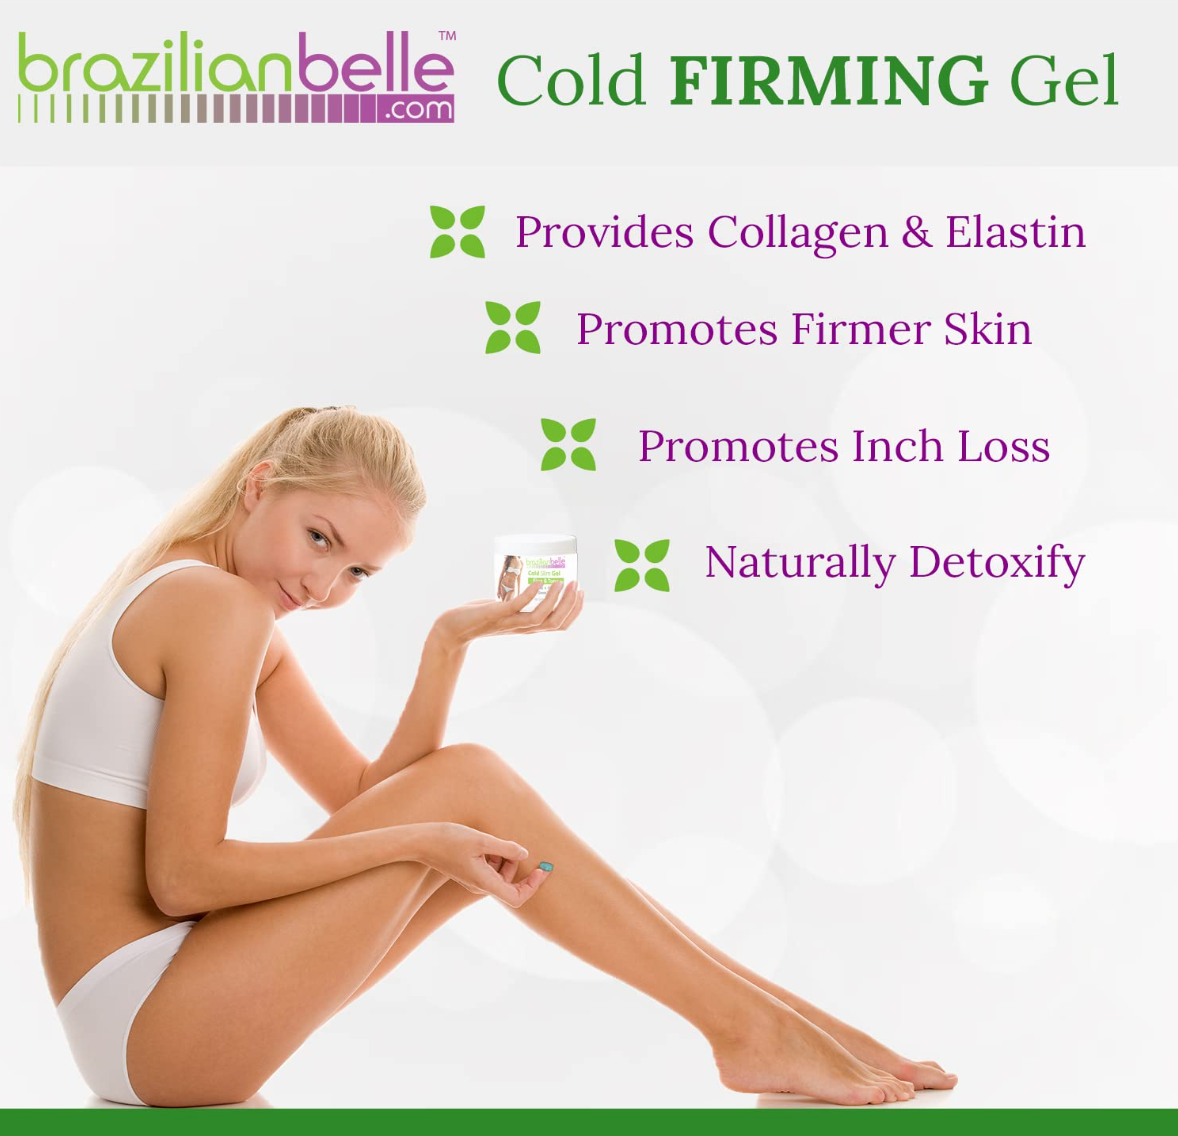 Brazilian Belle Cold Gel with Caffeine and Green Tea Extract - Improves Skin’s Texture, Hydrates, and Moisturizes - Cryo Gel (1 Jar)